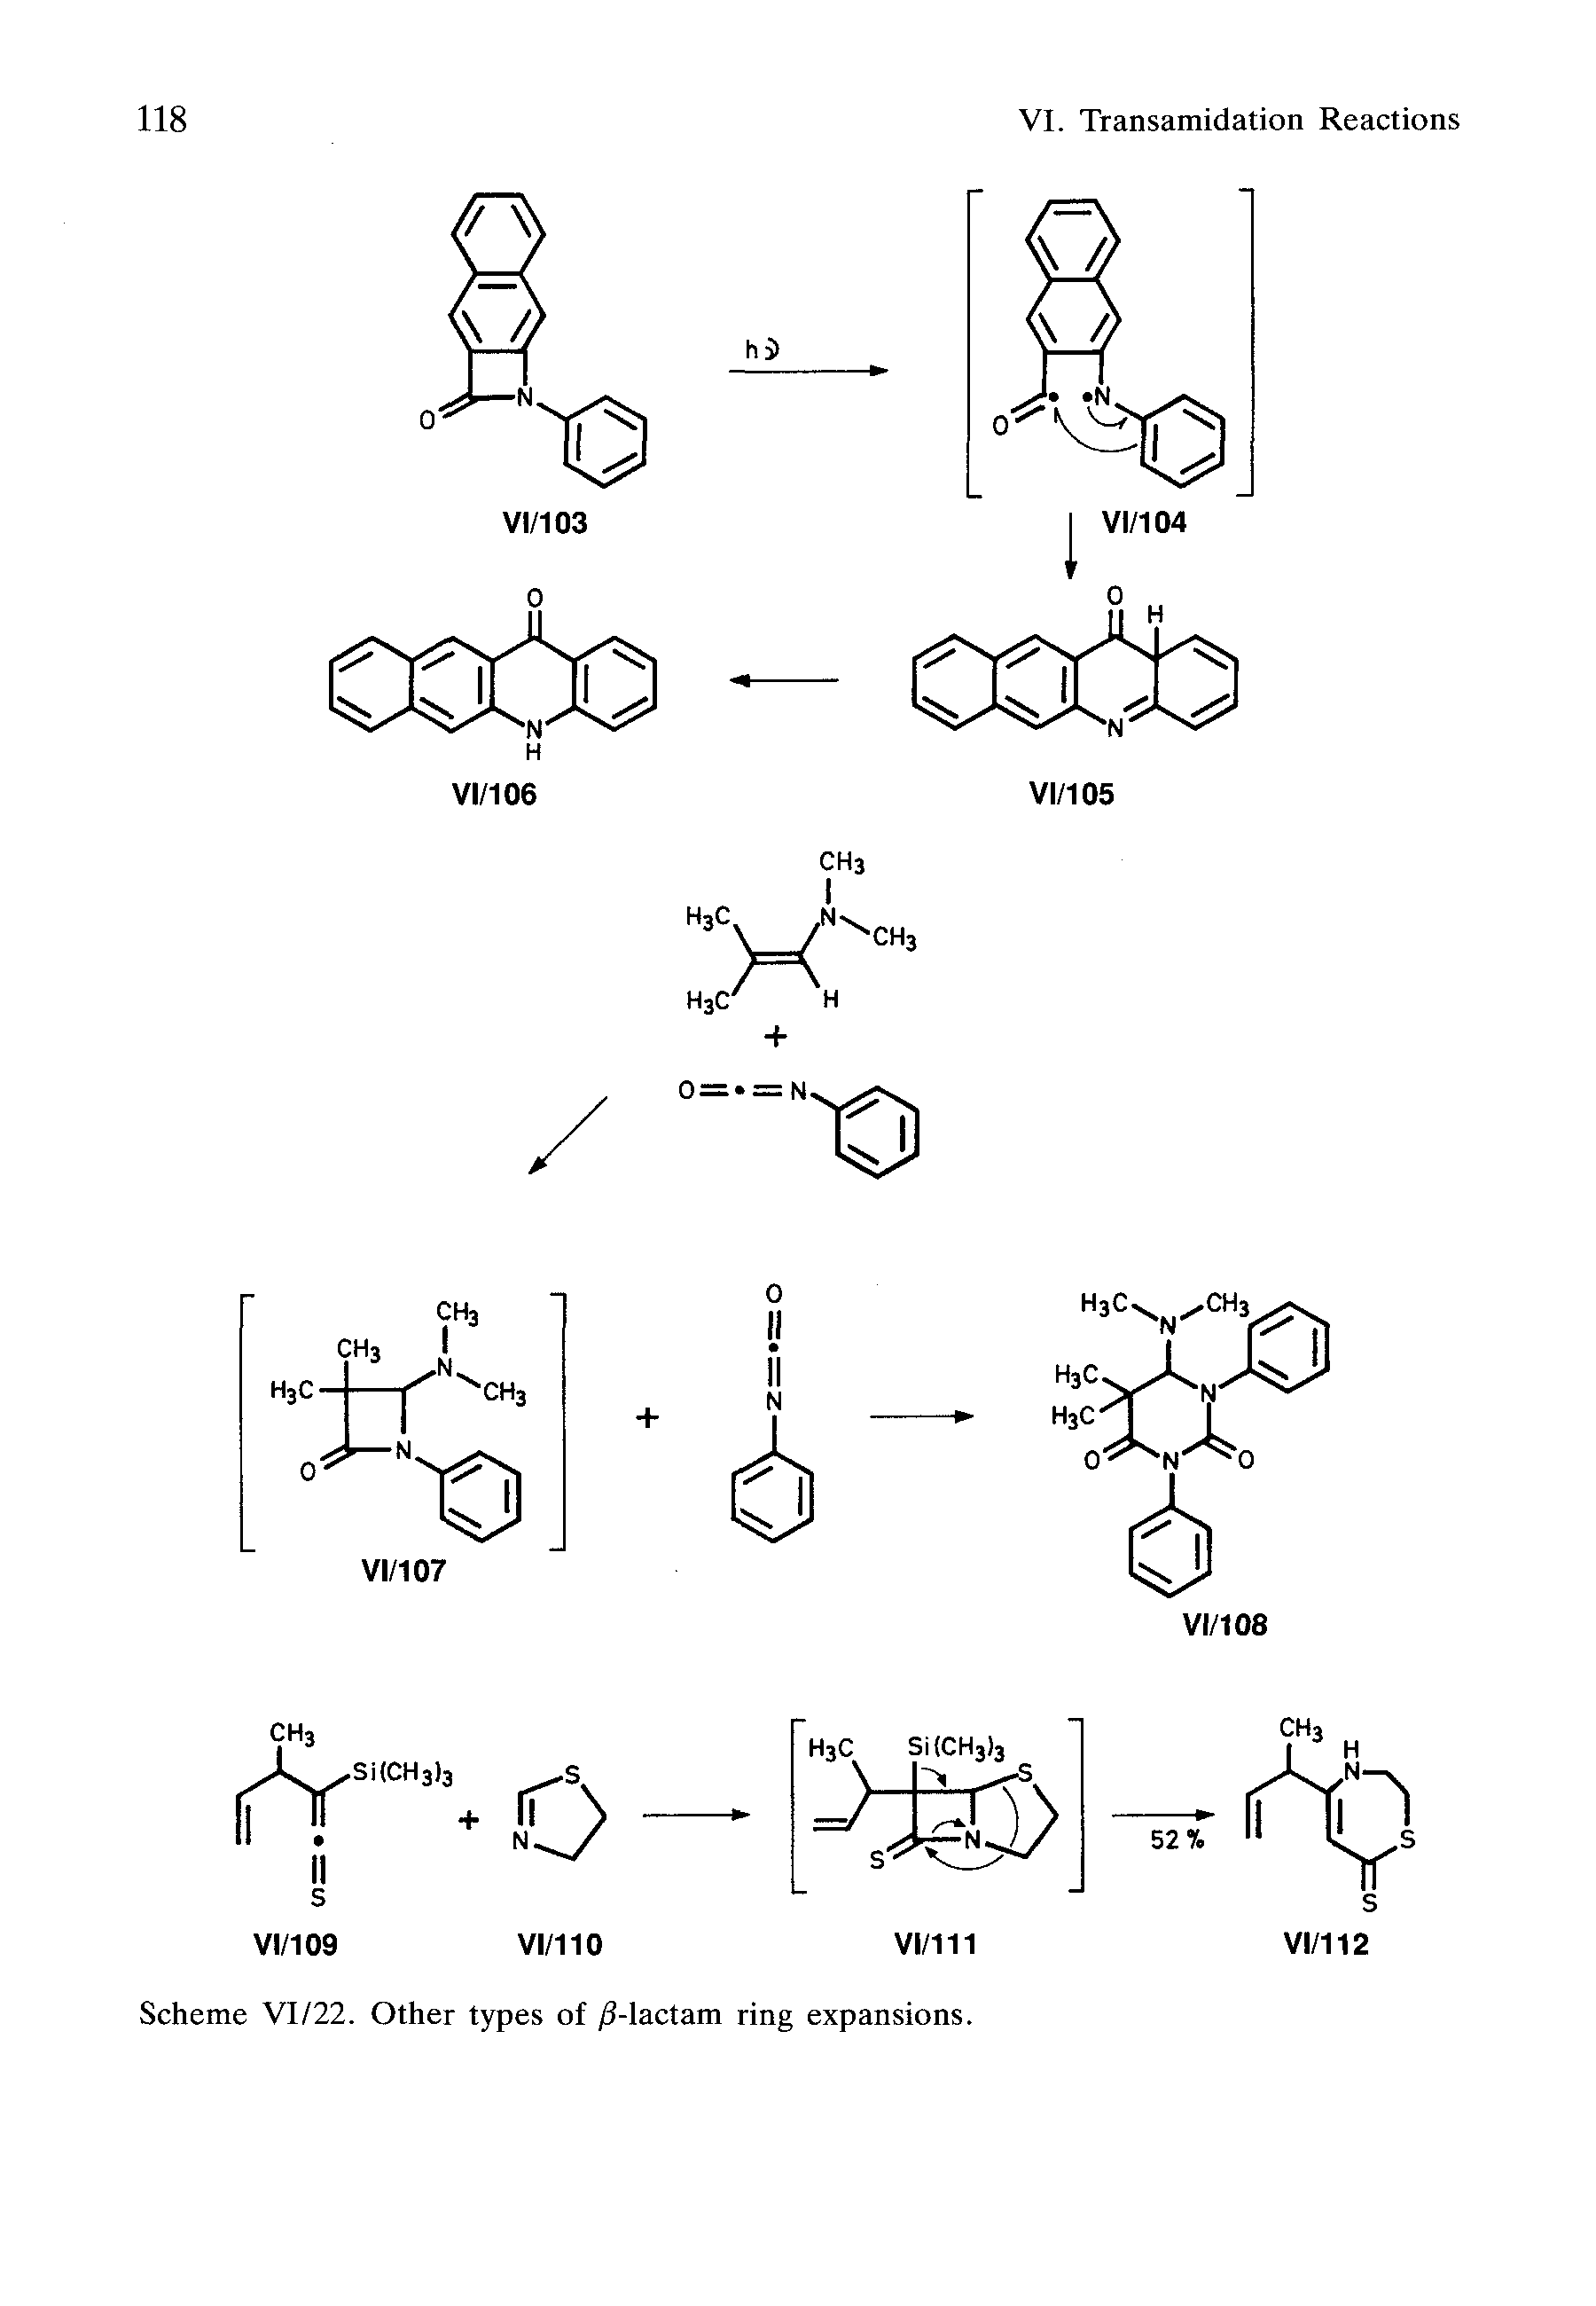 Scheme VI/22. Other types of /3-lactam ring expansions.